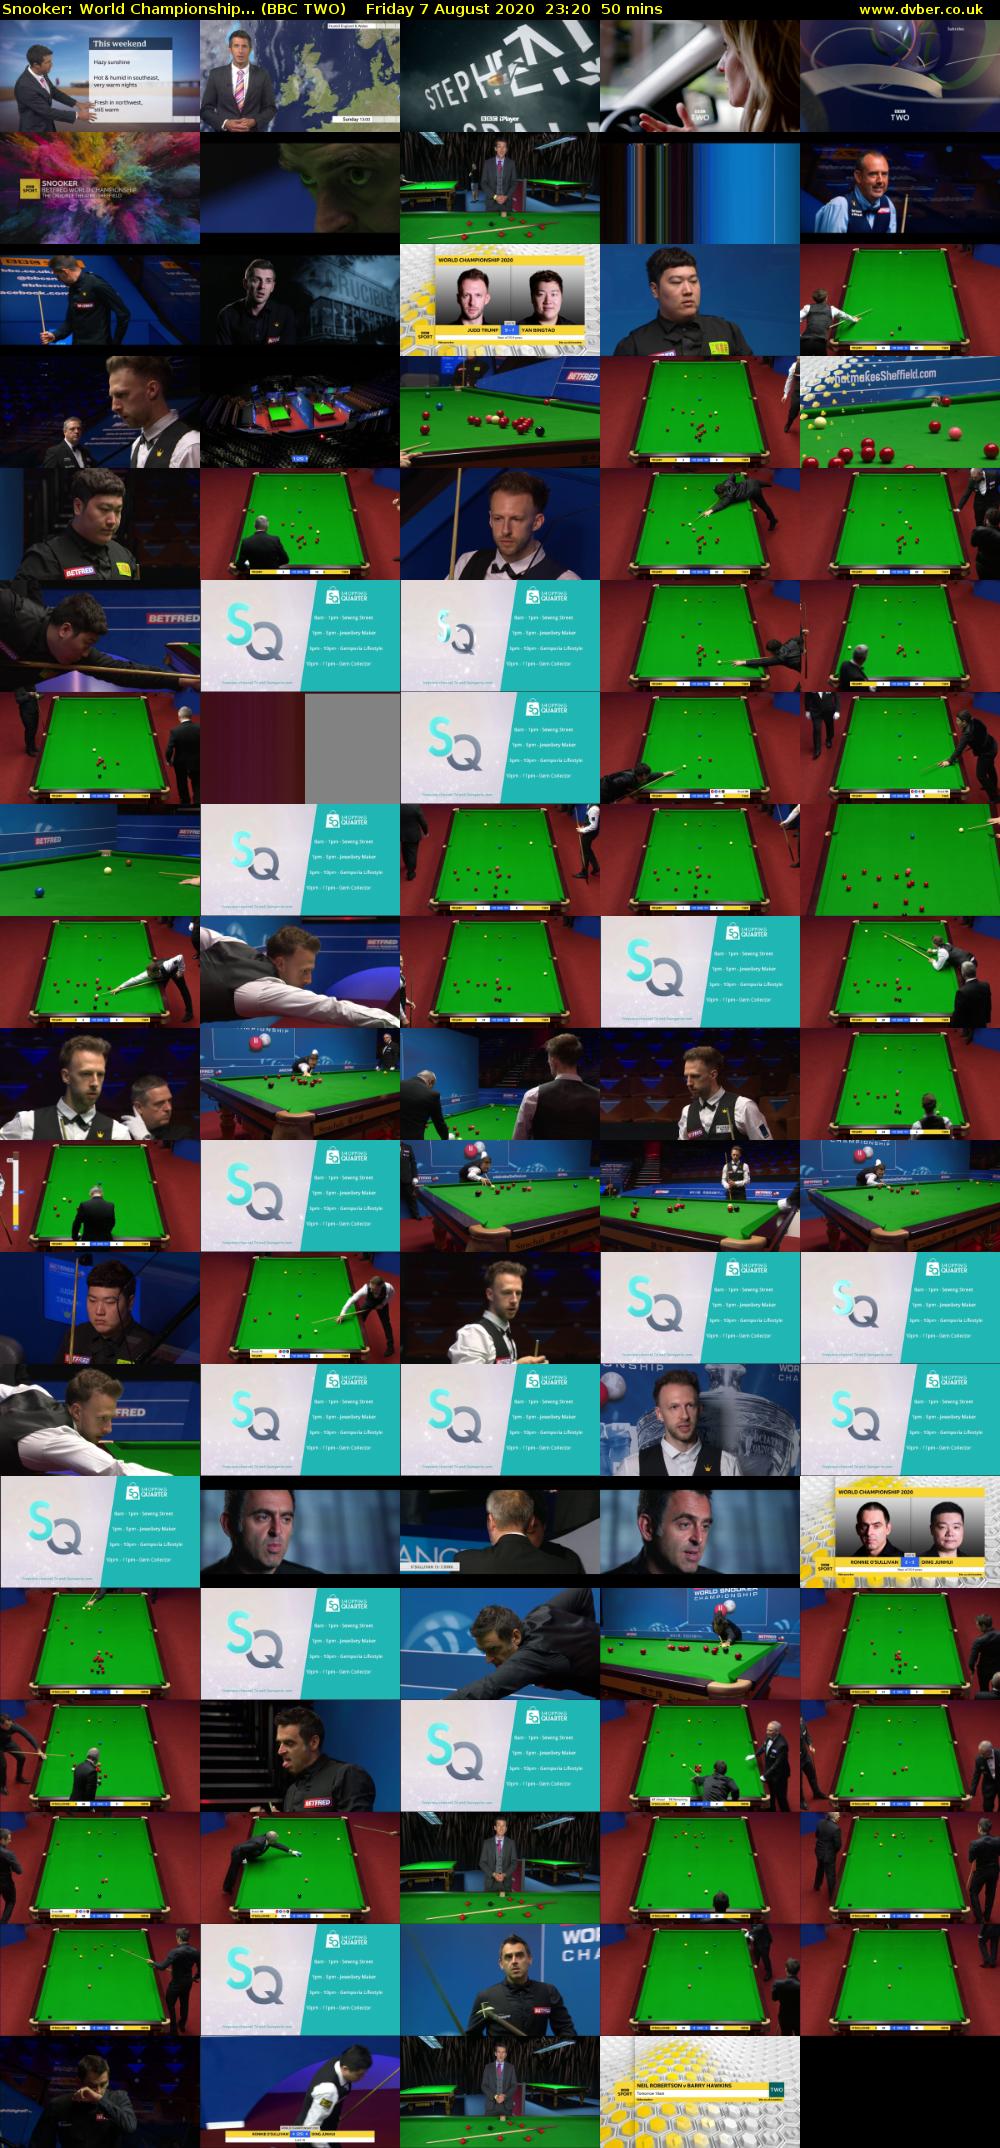 Snooker: World Championship... (BBC TWO) Friday 7 August 2020 23:20 - 00:10